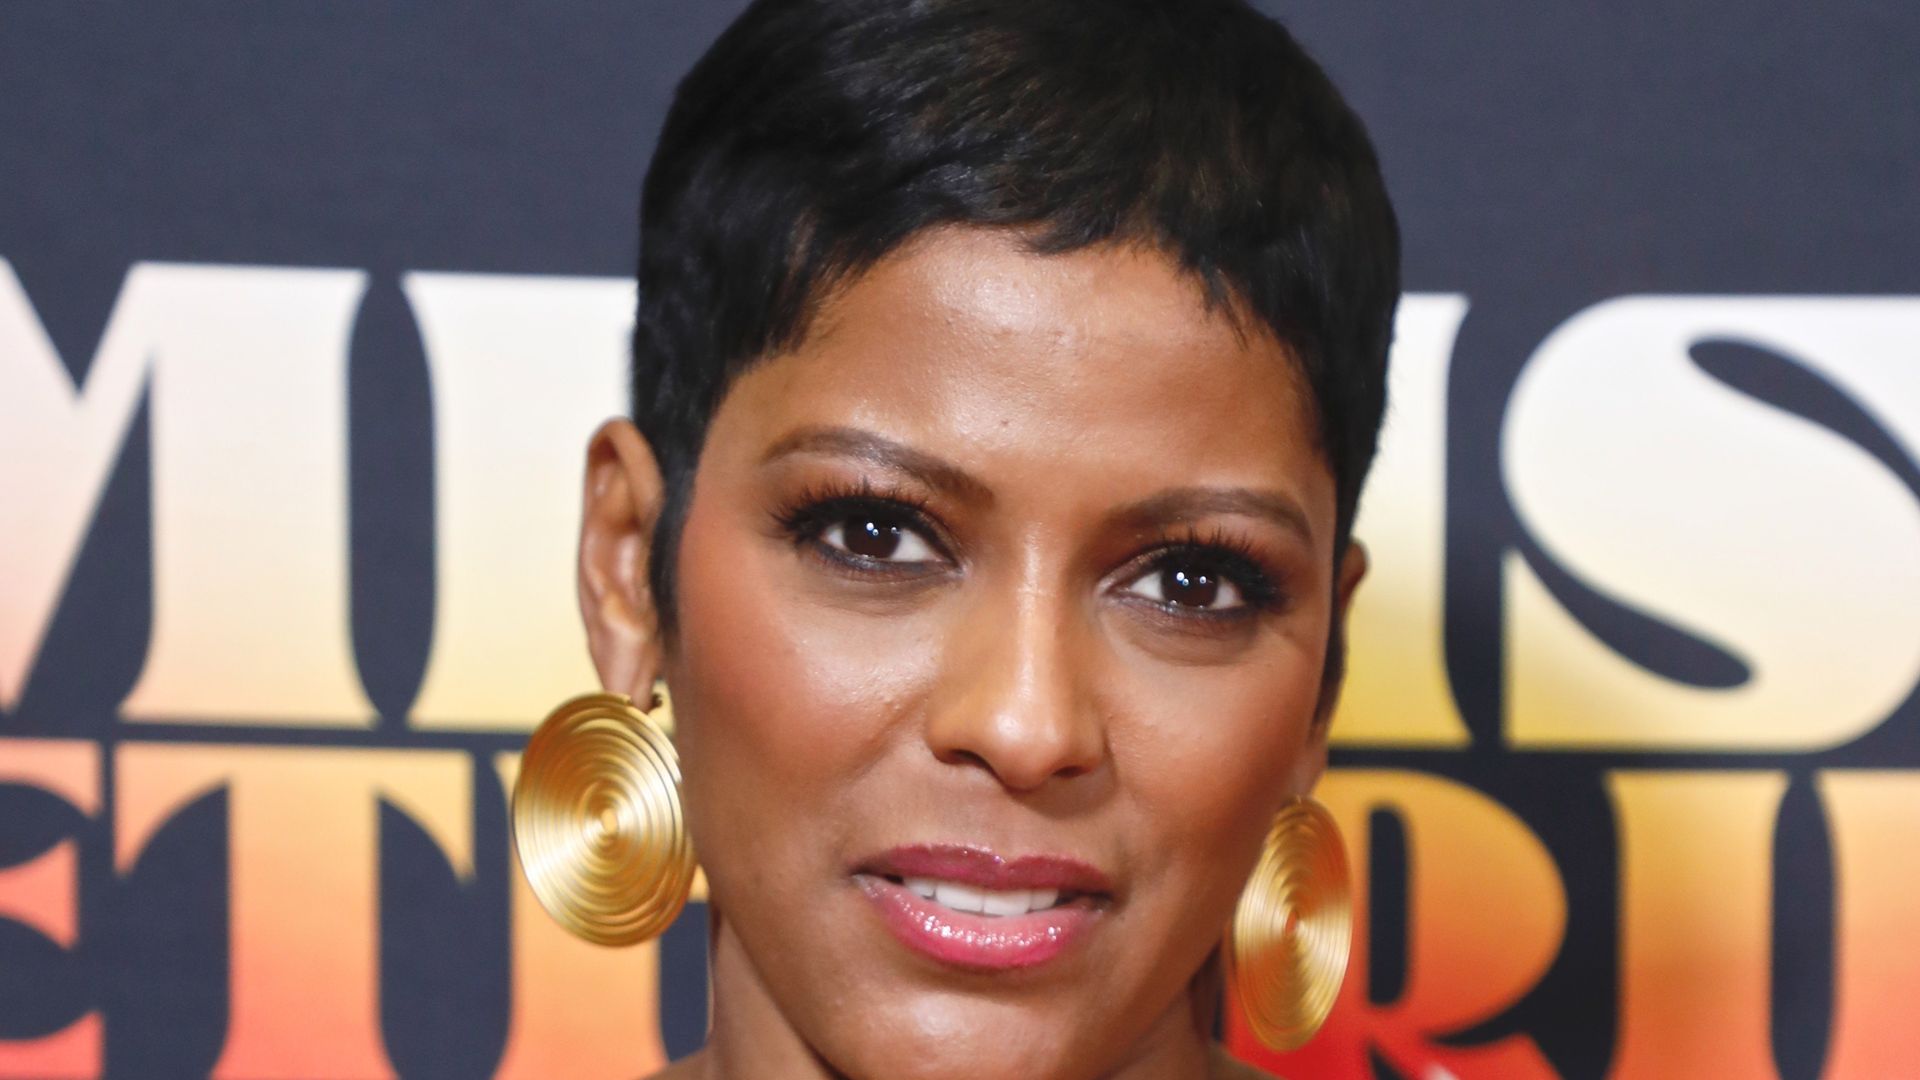 Tamron Hall in a black dress